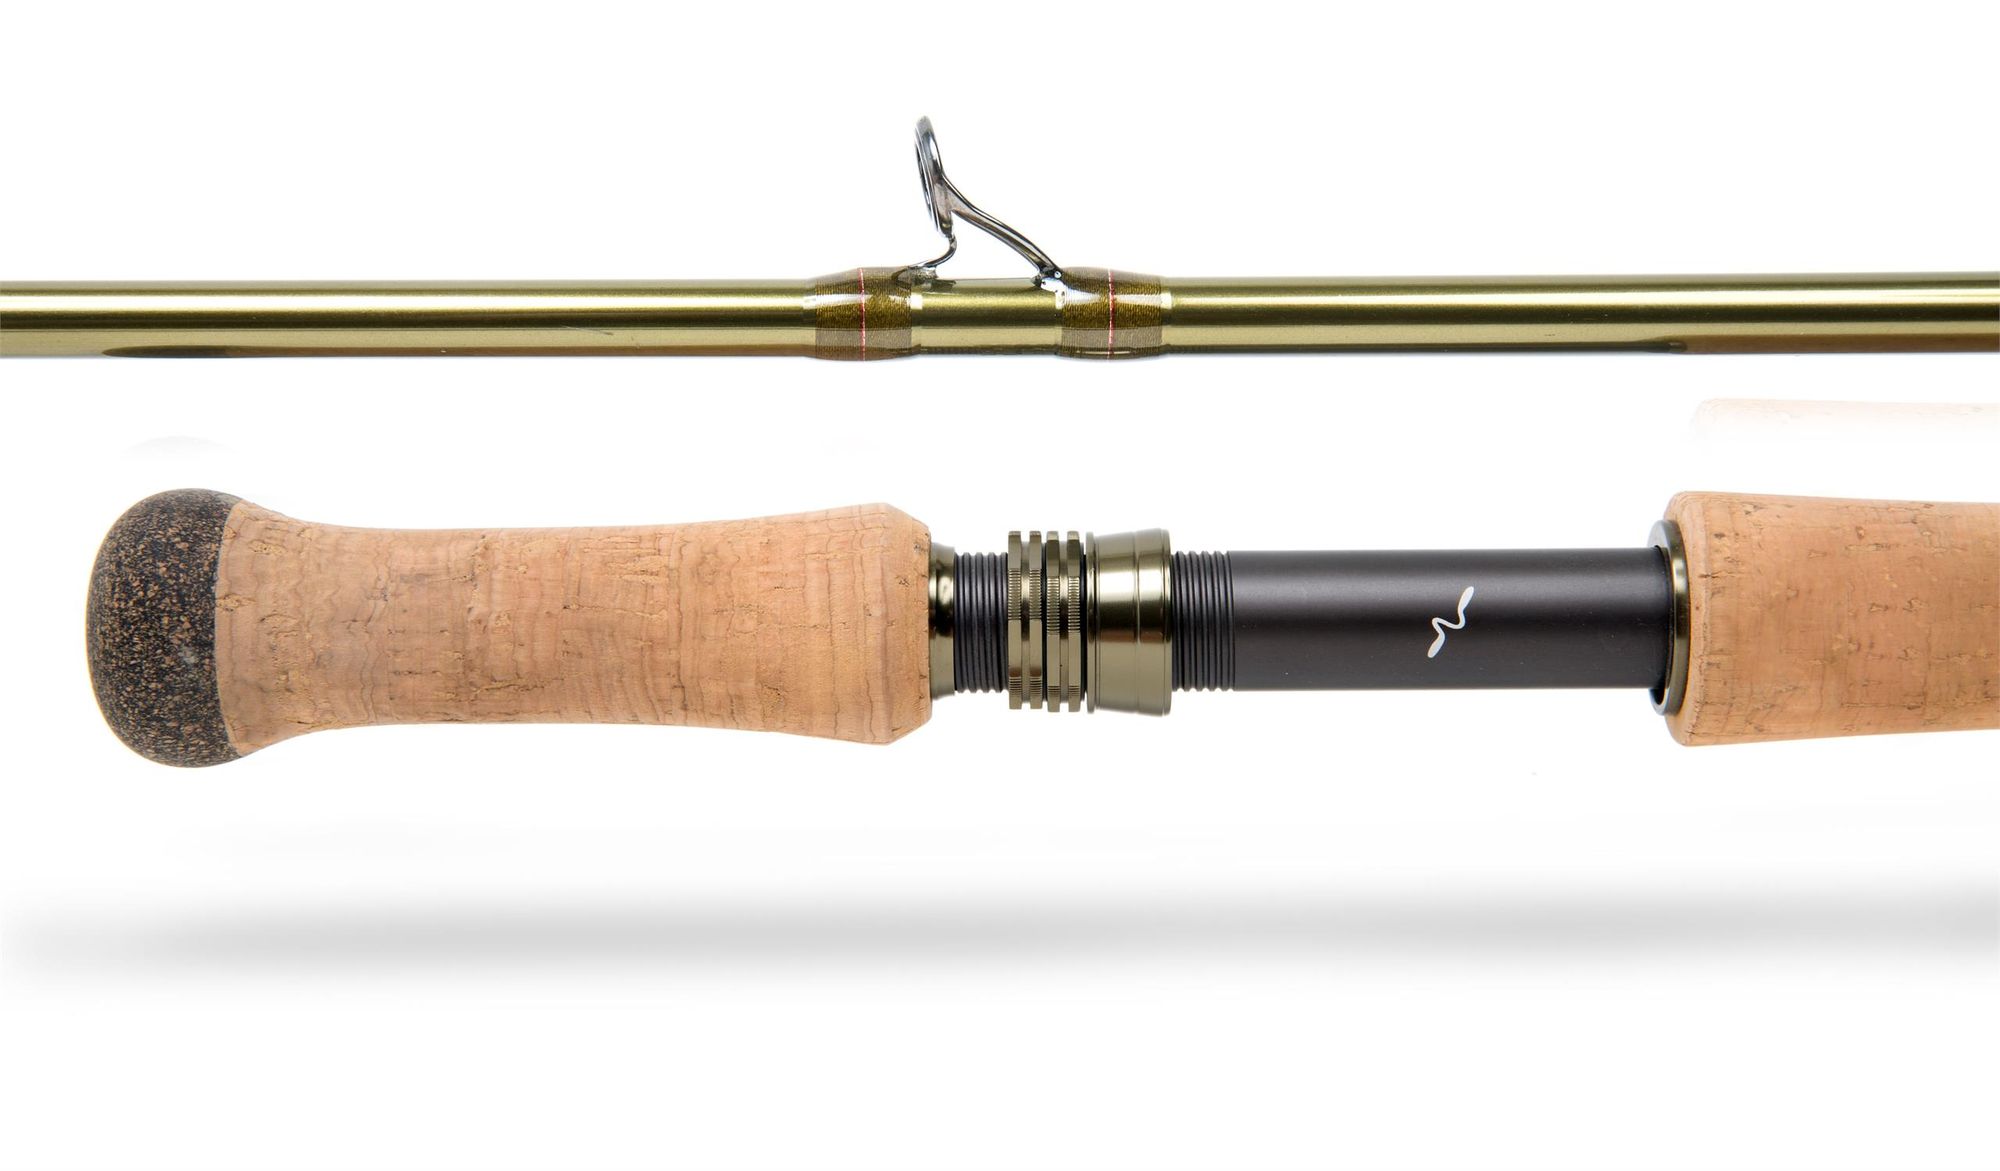 Guideline Stoked Double Handed Fly Rod - Fin & Game